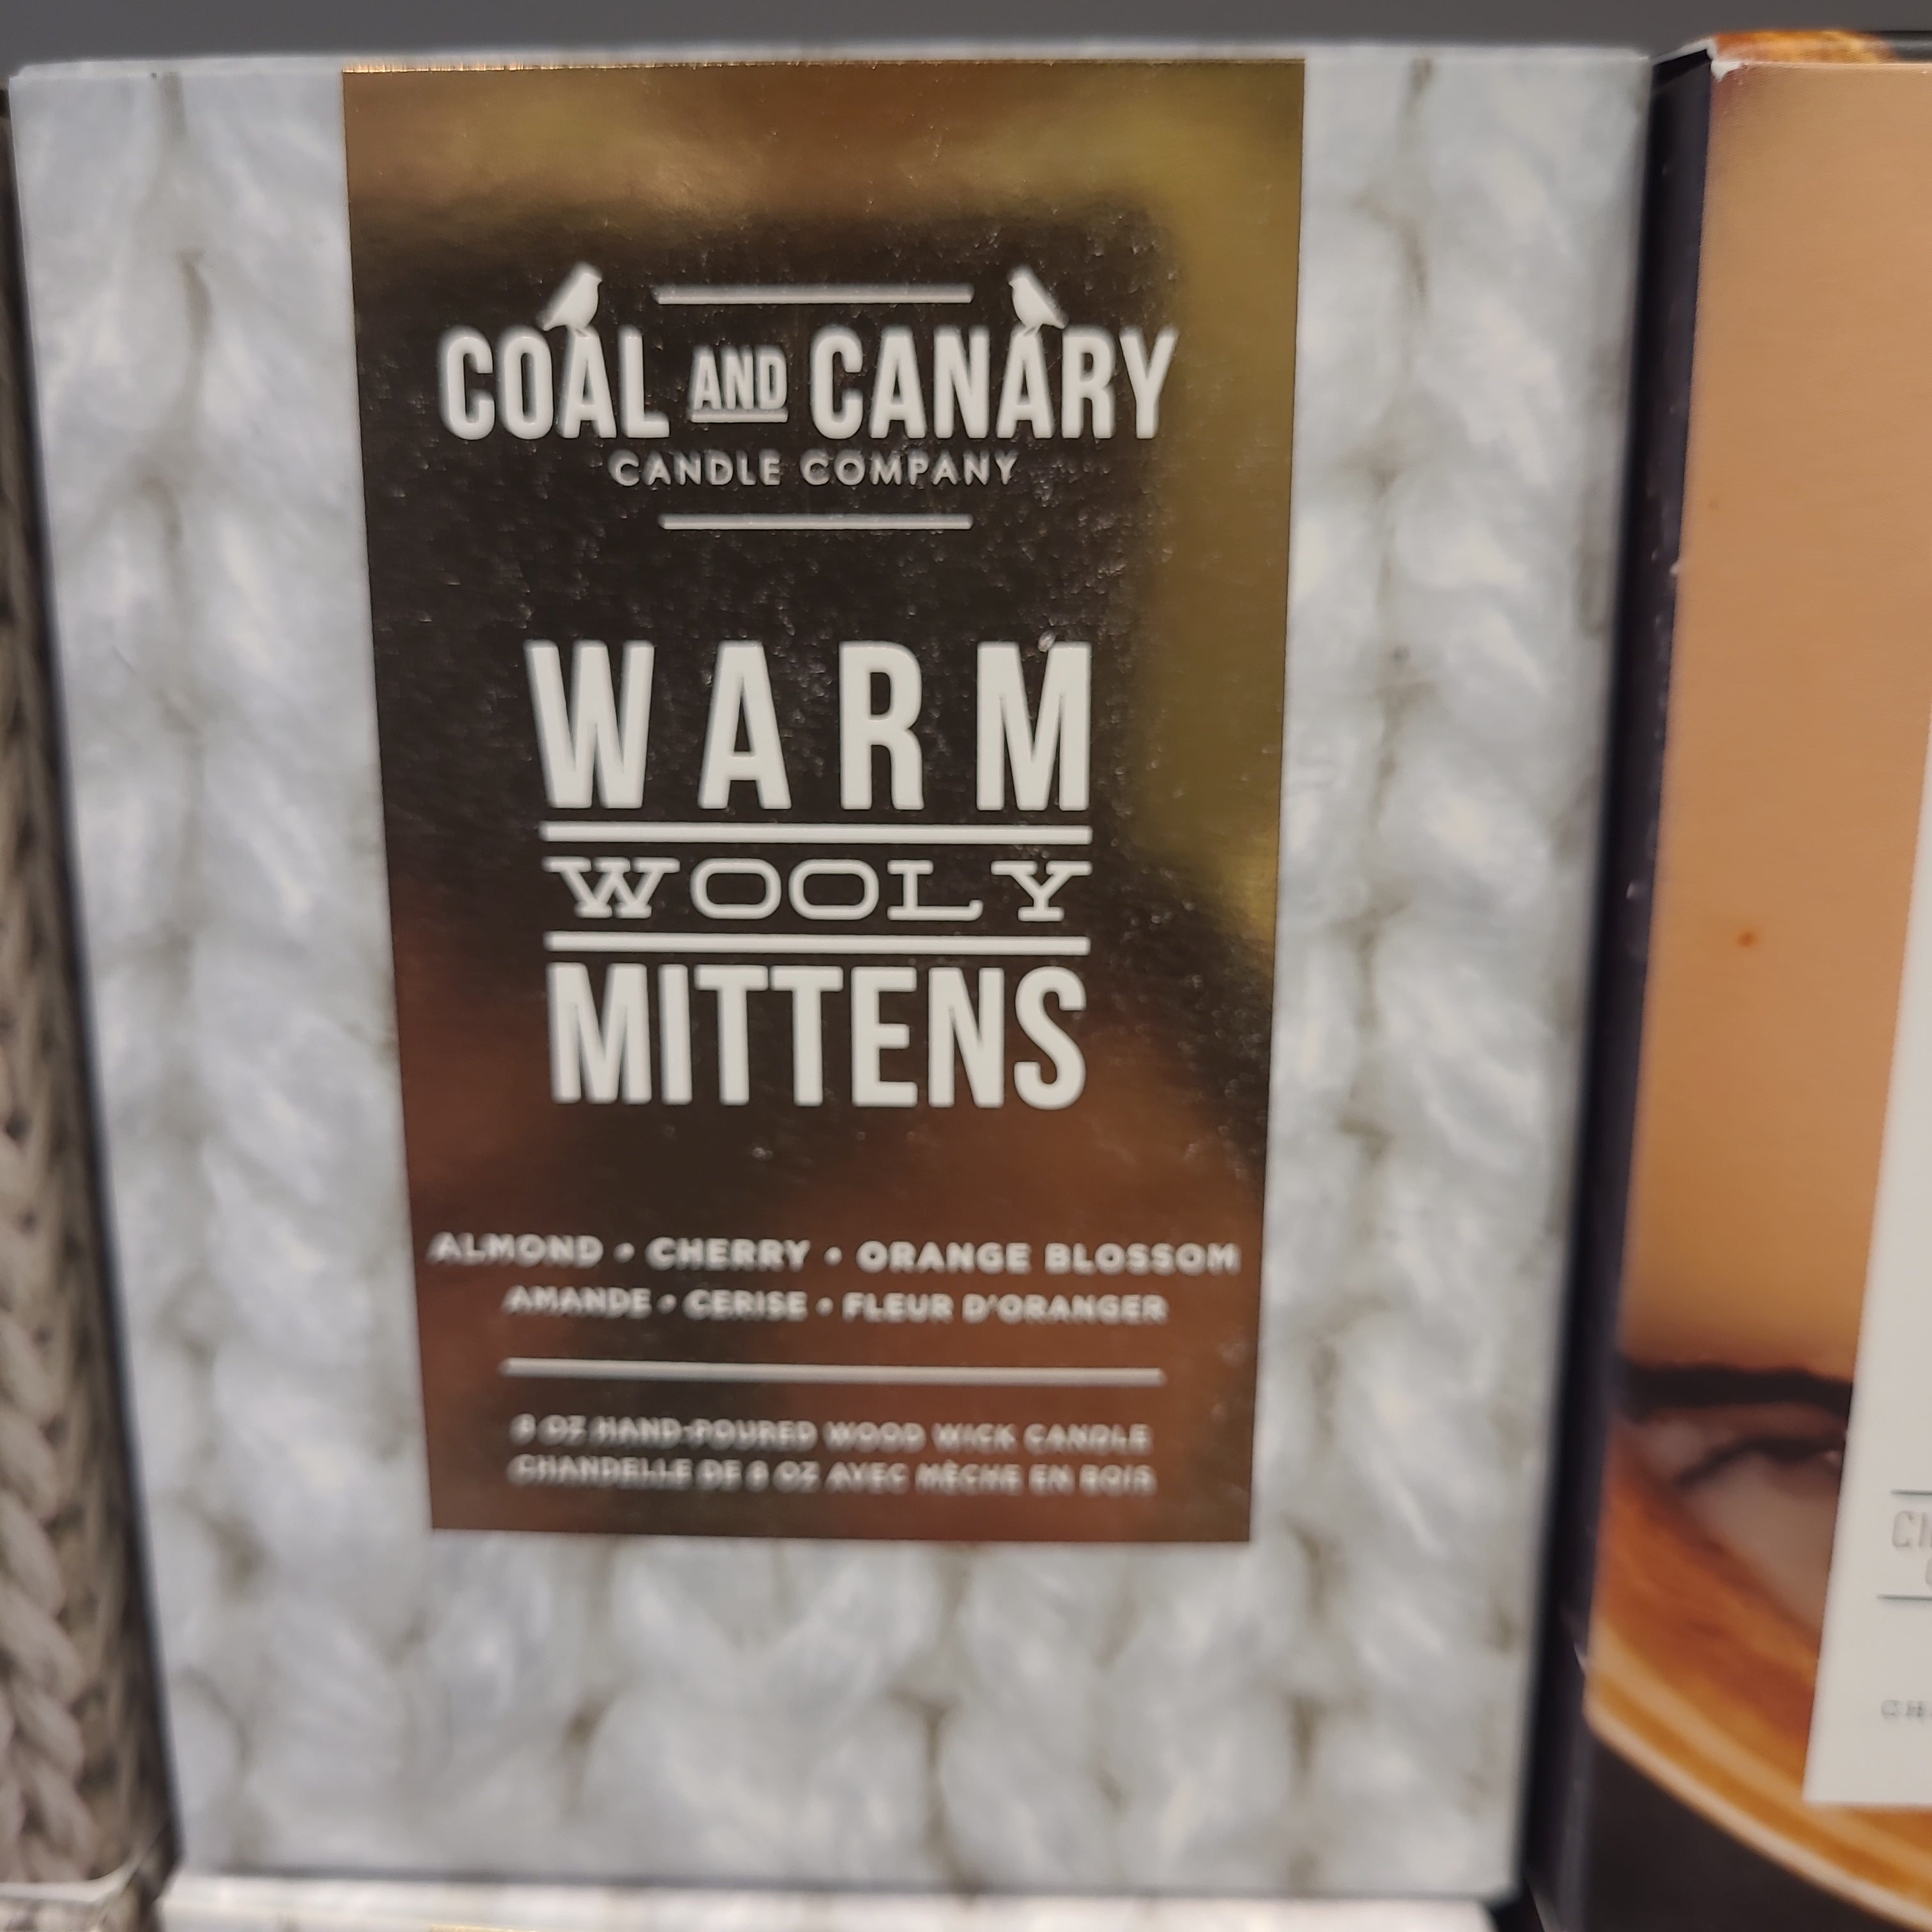 Coal and Canary -Warm wooly mittens.